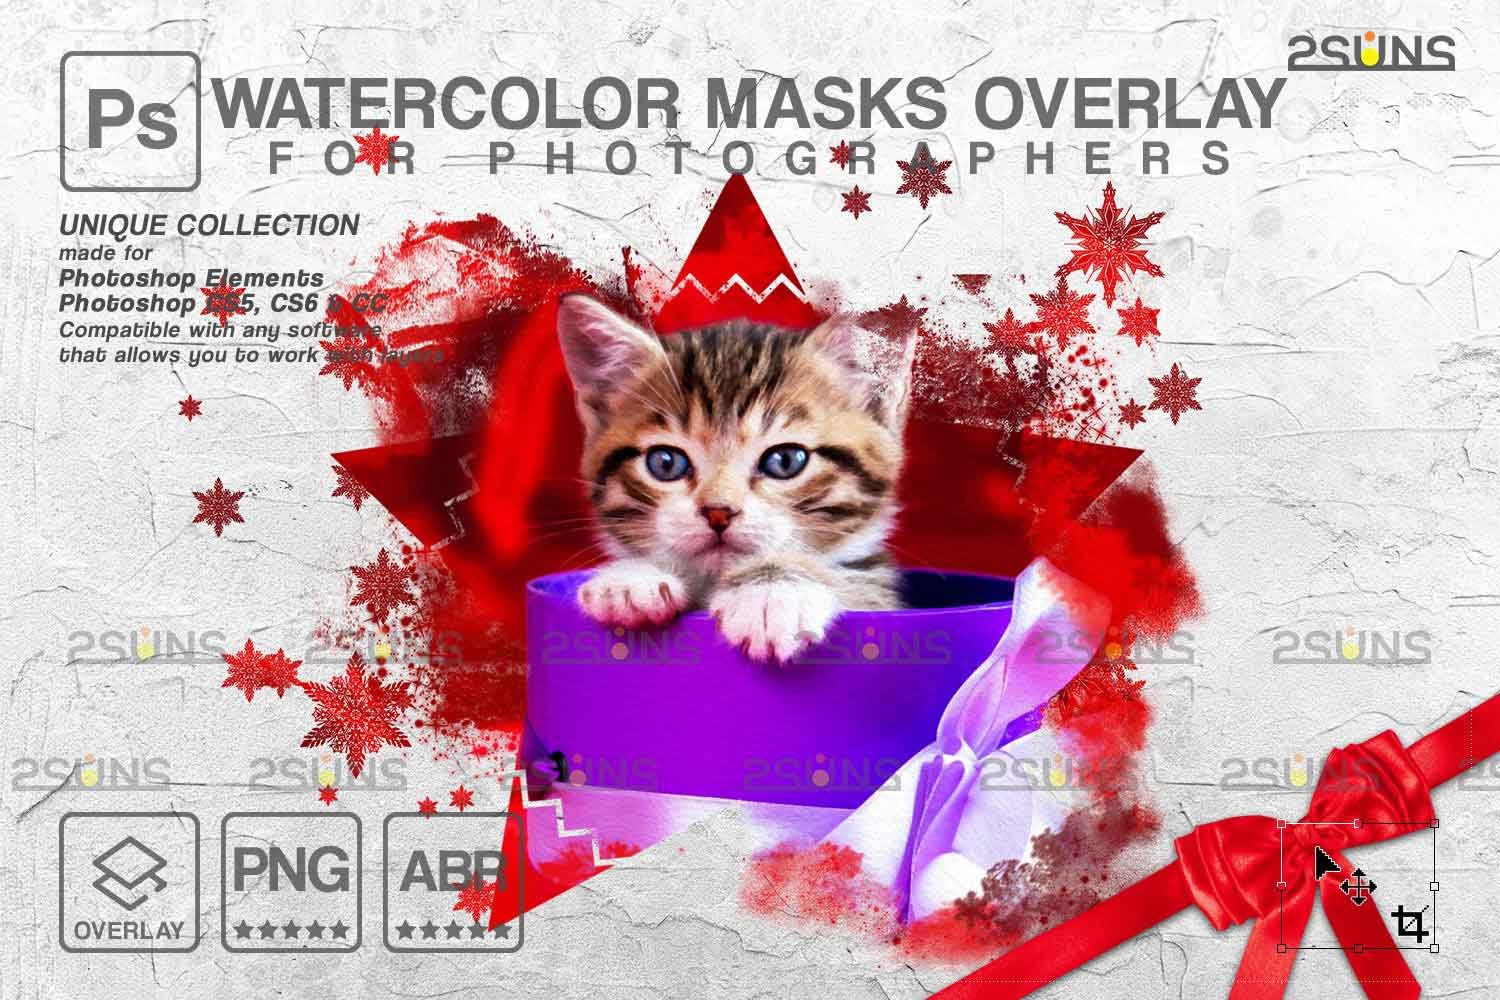 Watercolor overlay maskscover image.